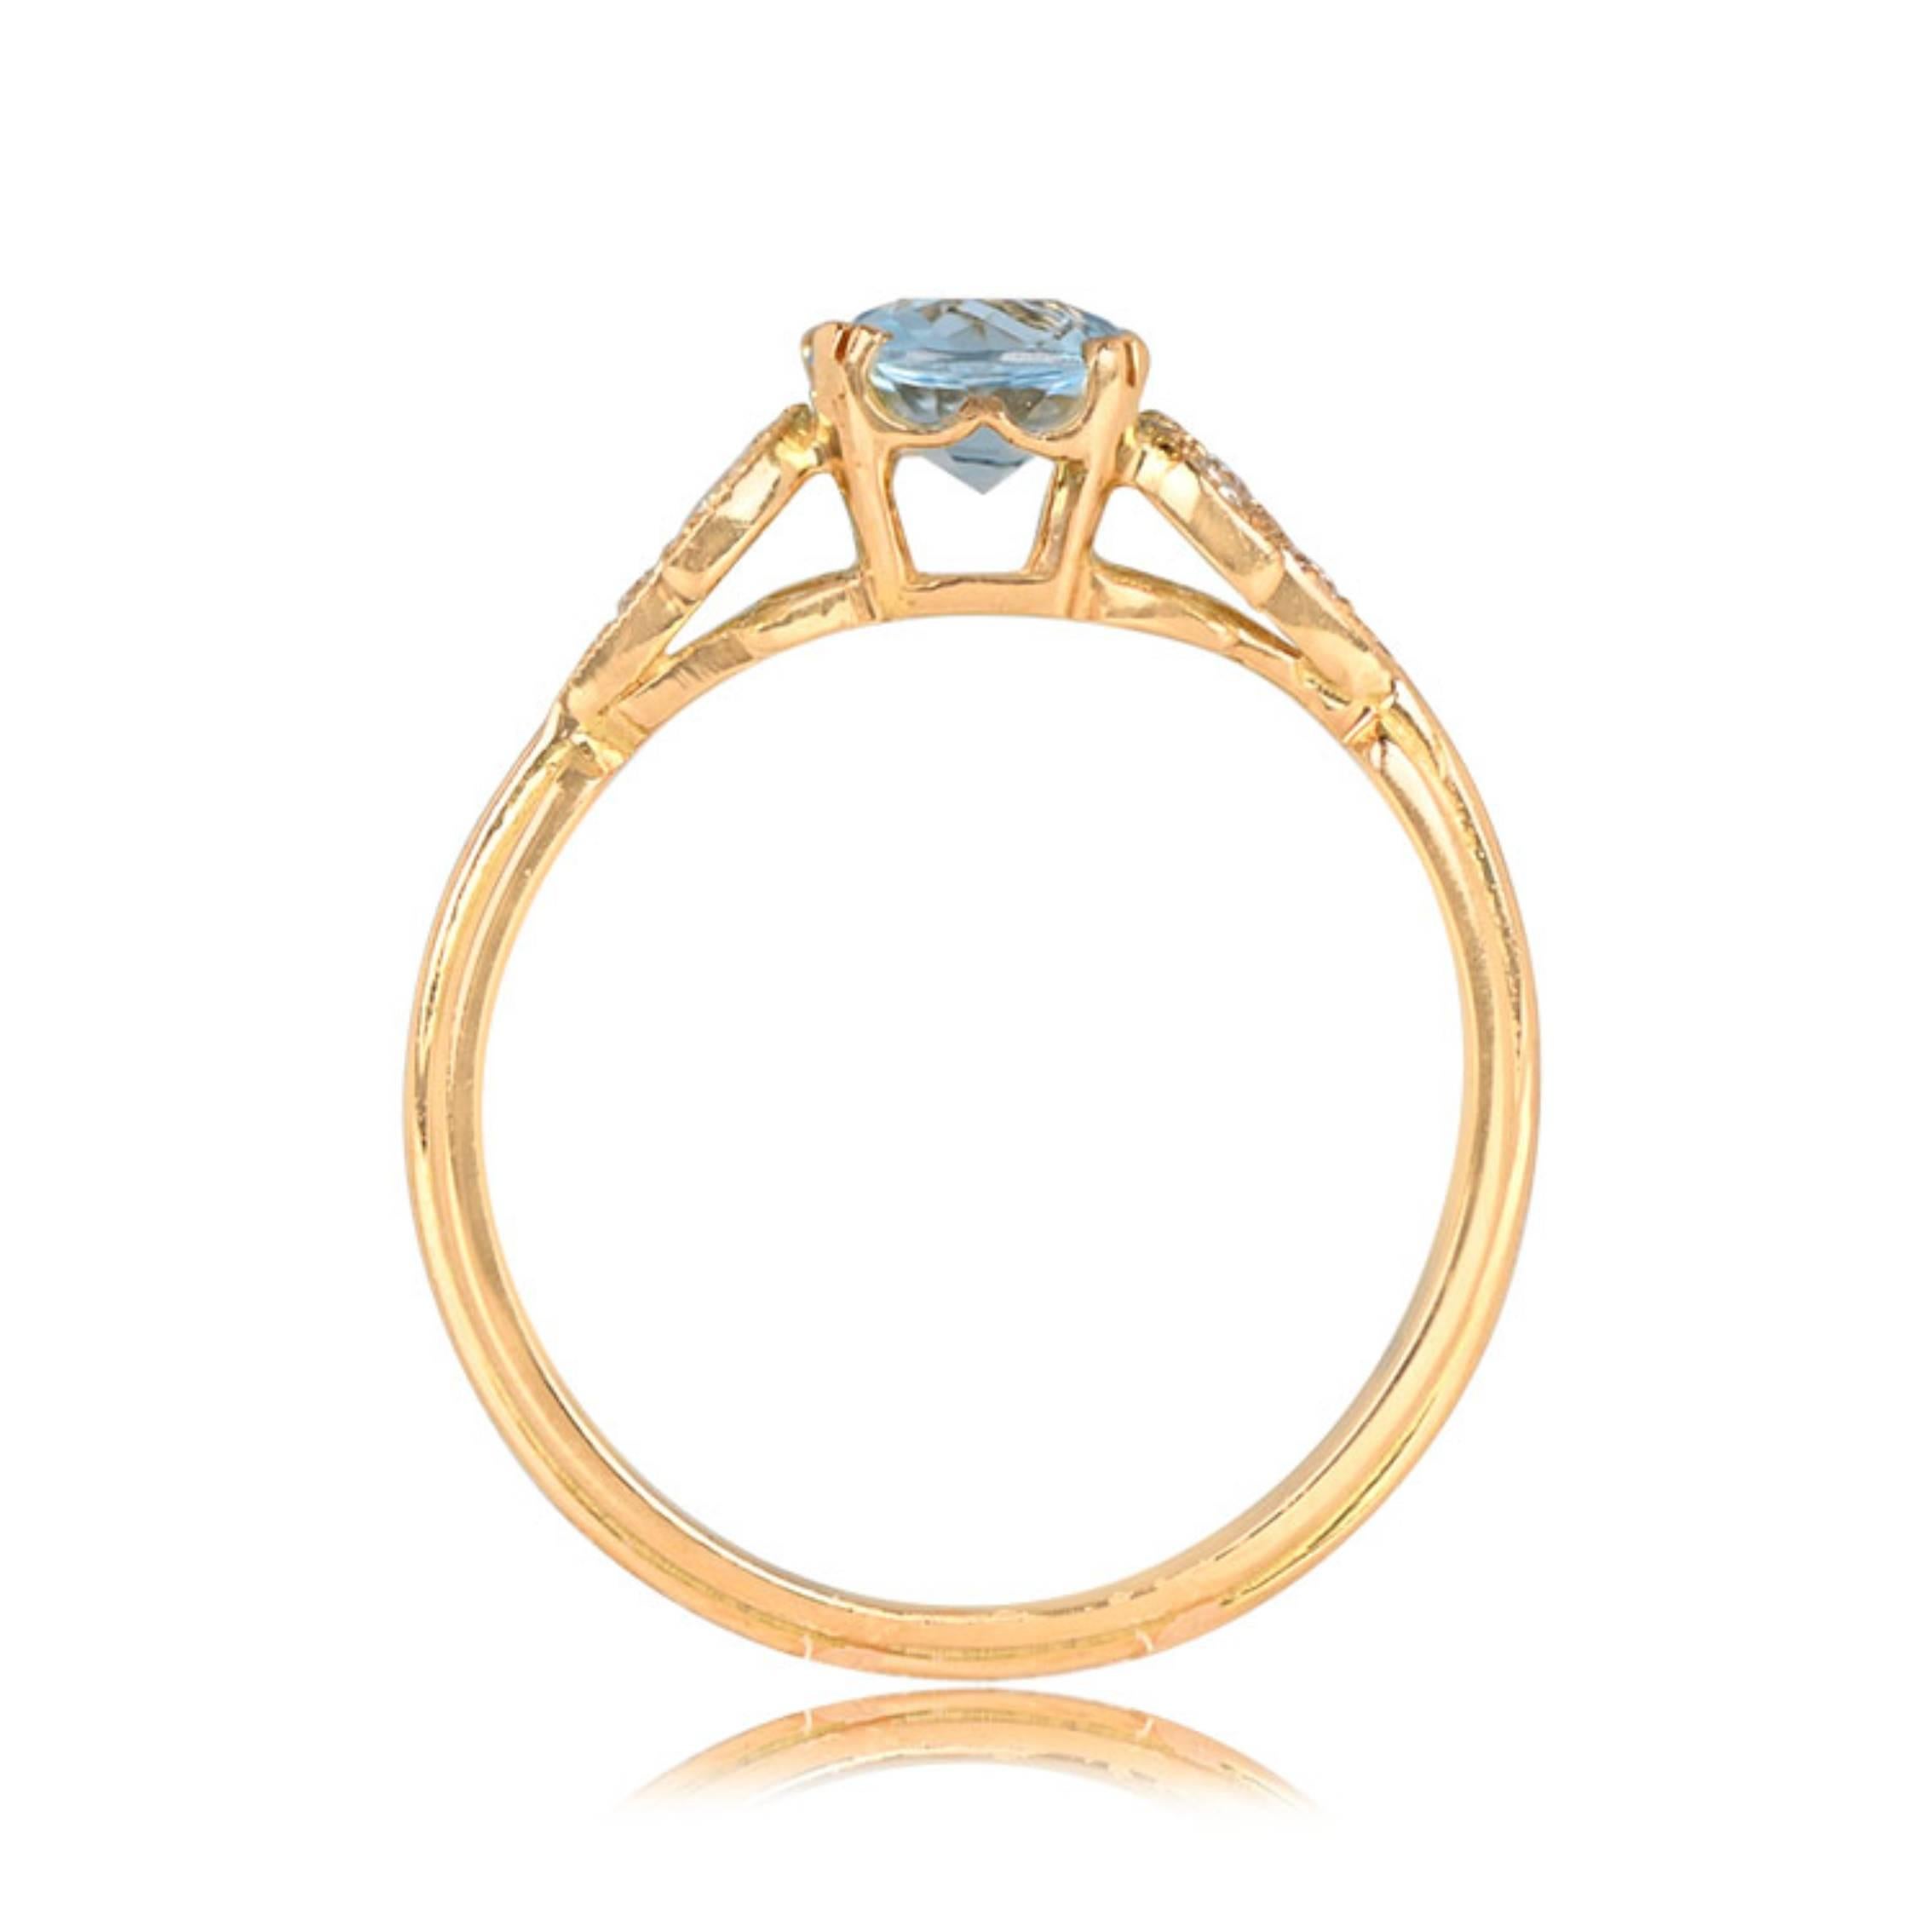 0.72ct Round Cut Aquamarine Engagement Ring, 18k Yellow Gold In Excellent Condition For Sale In New York, NY